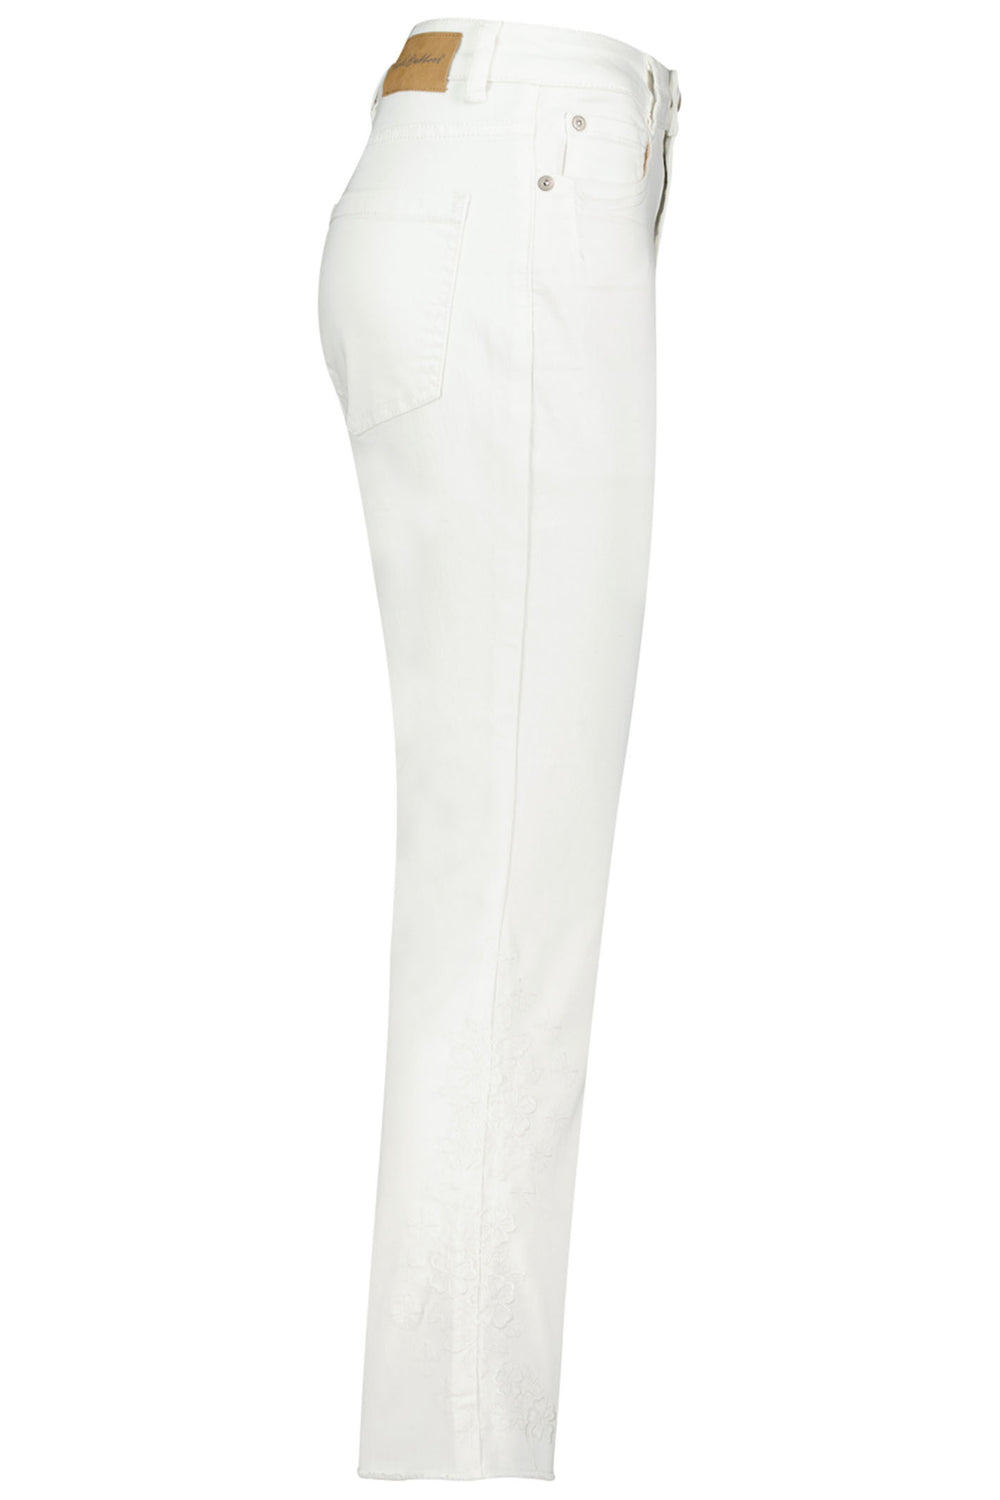 Red Button SRB4210 Kate Off White Embroidery Jeans - Dotique